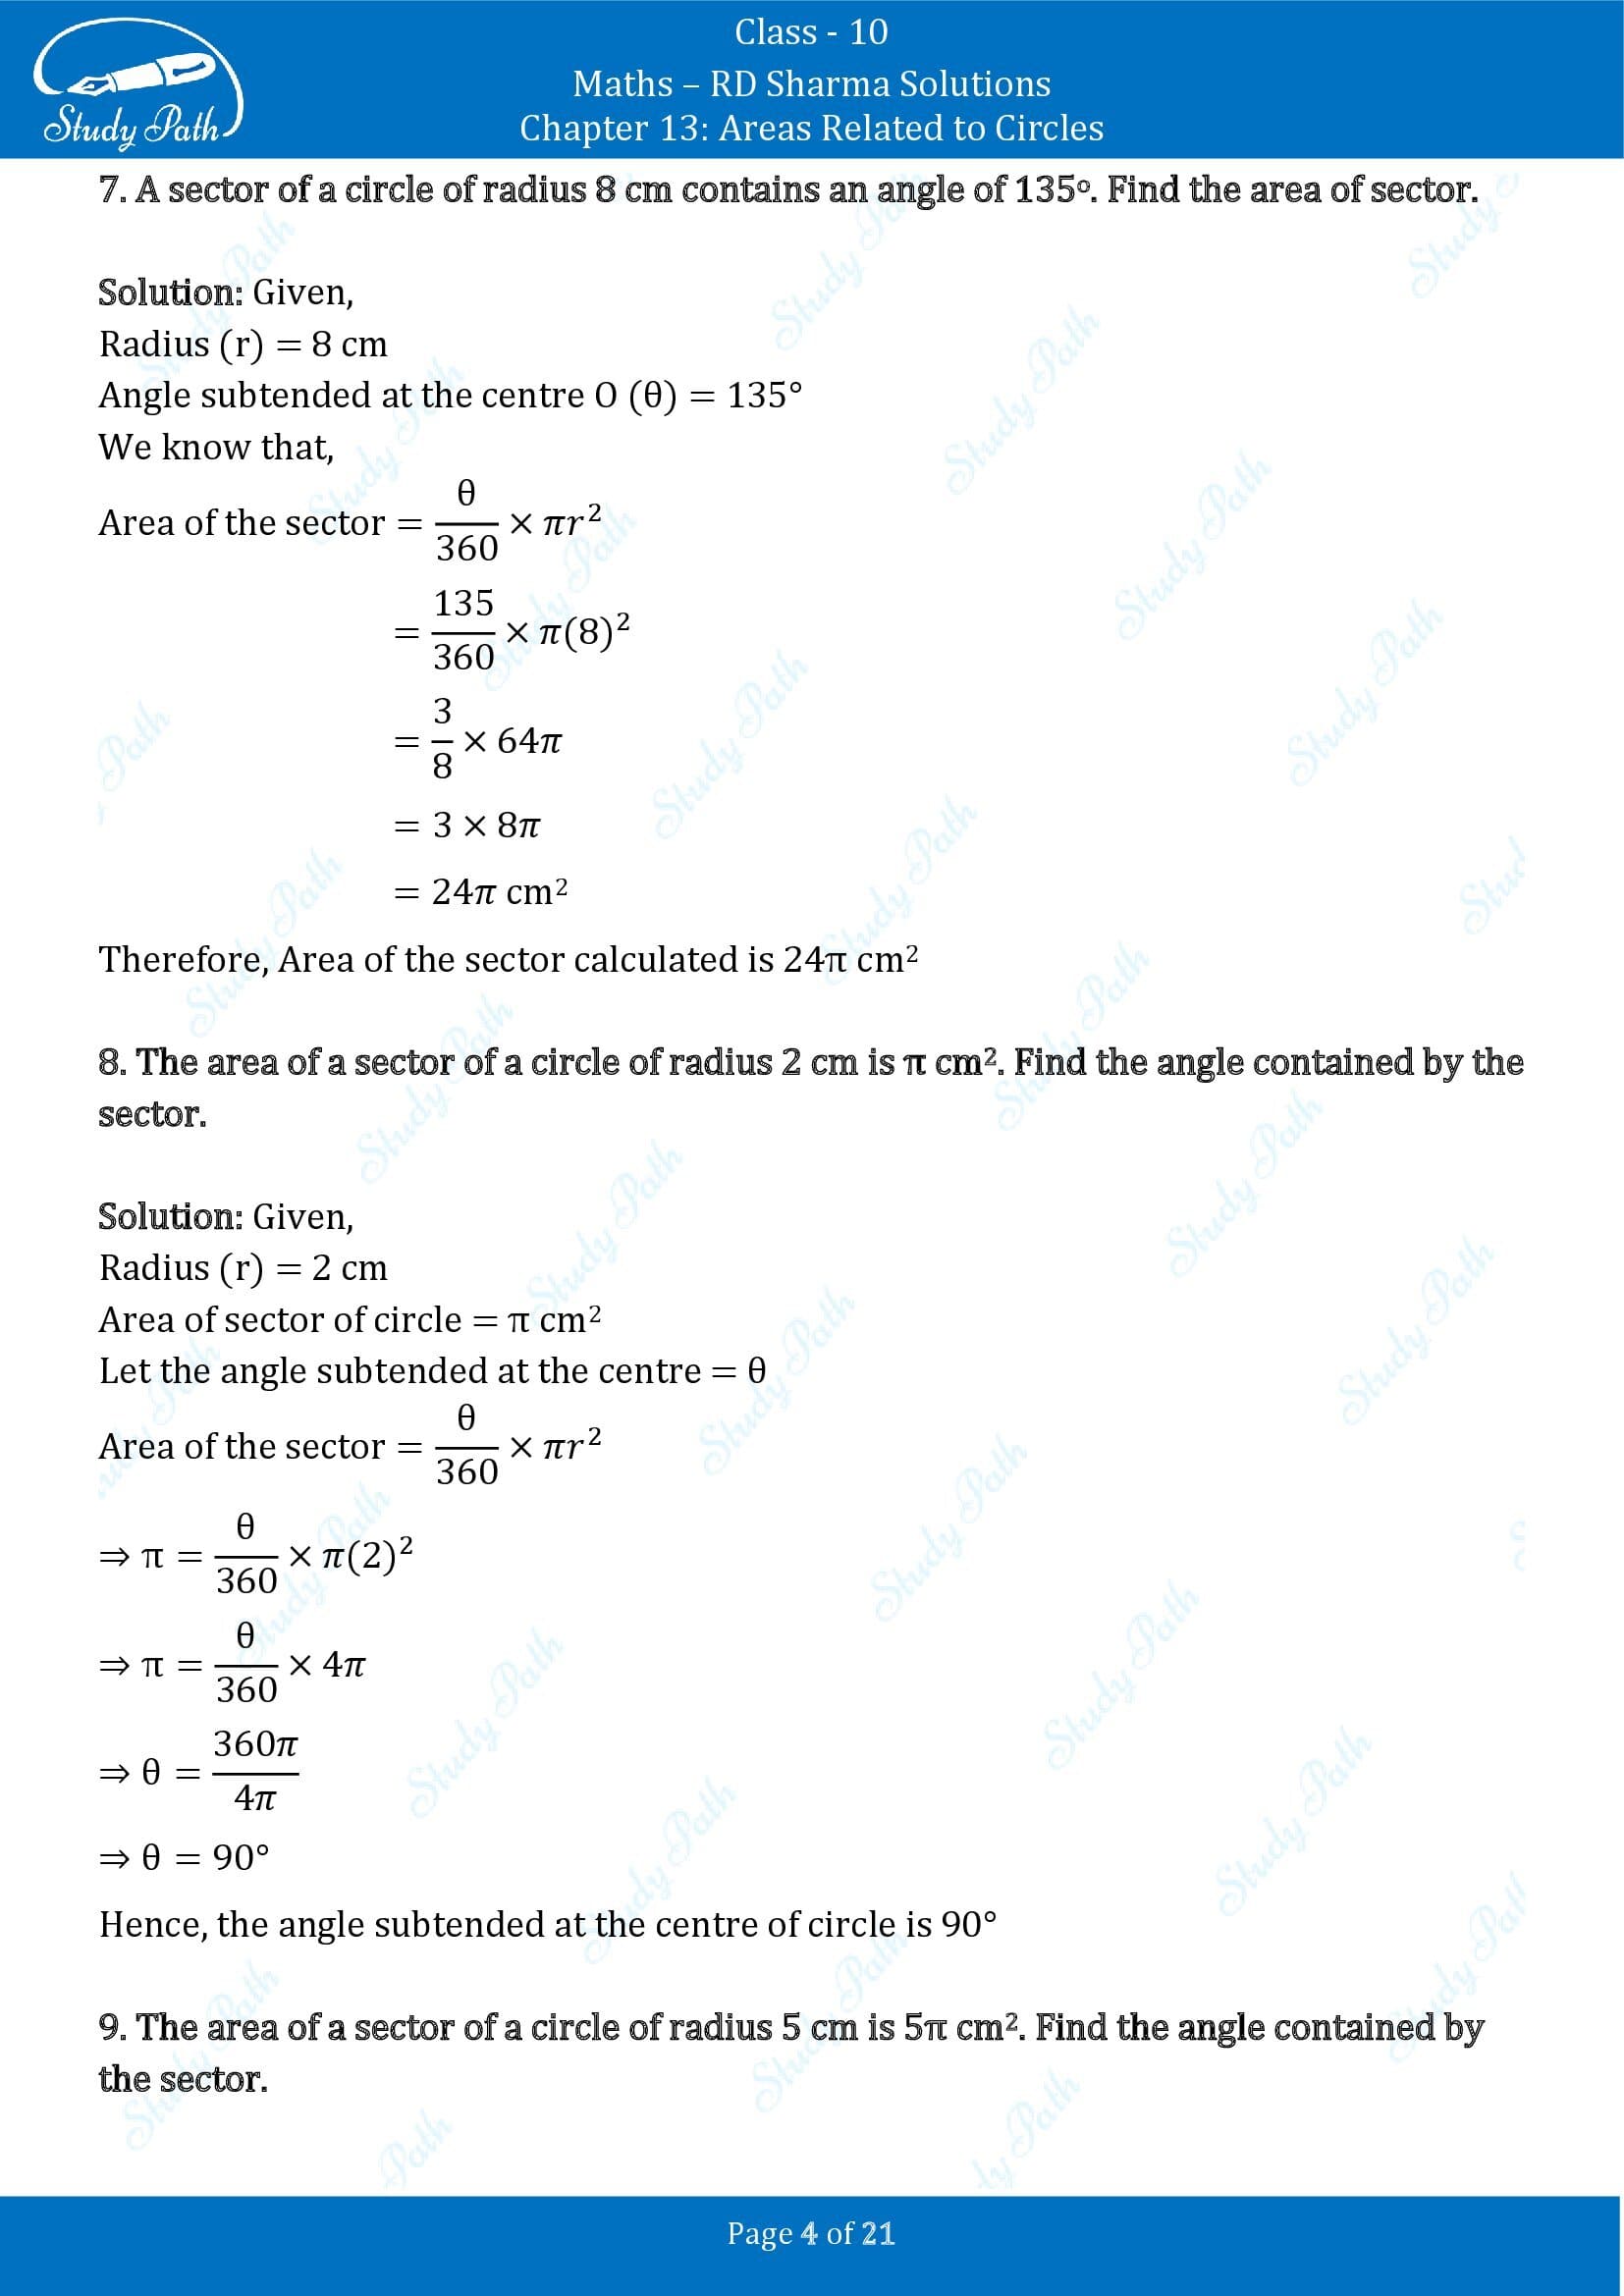 RD Sharma Solutions Class 10 Chapter 13 Areas Related to Circles Exercise 13.2 00004